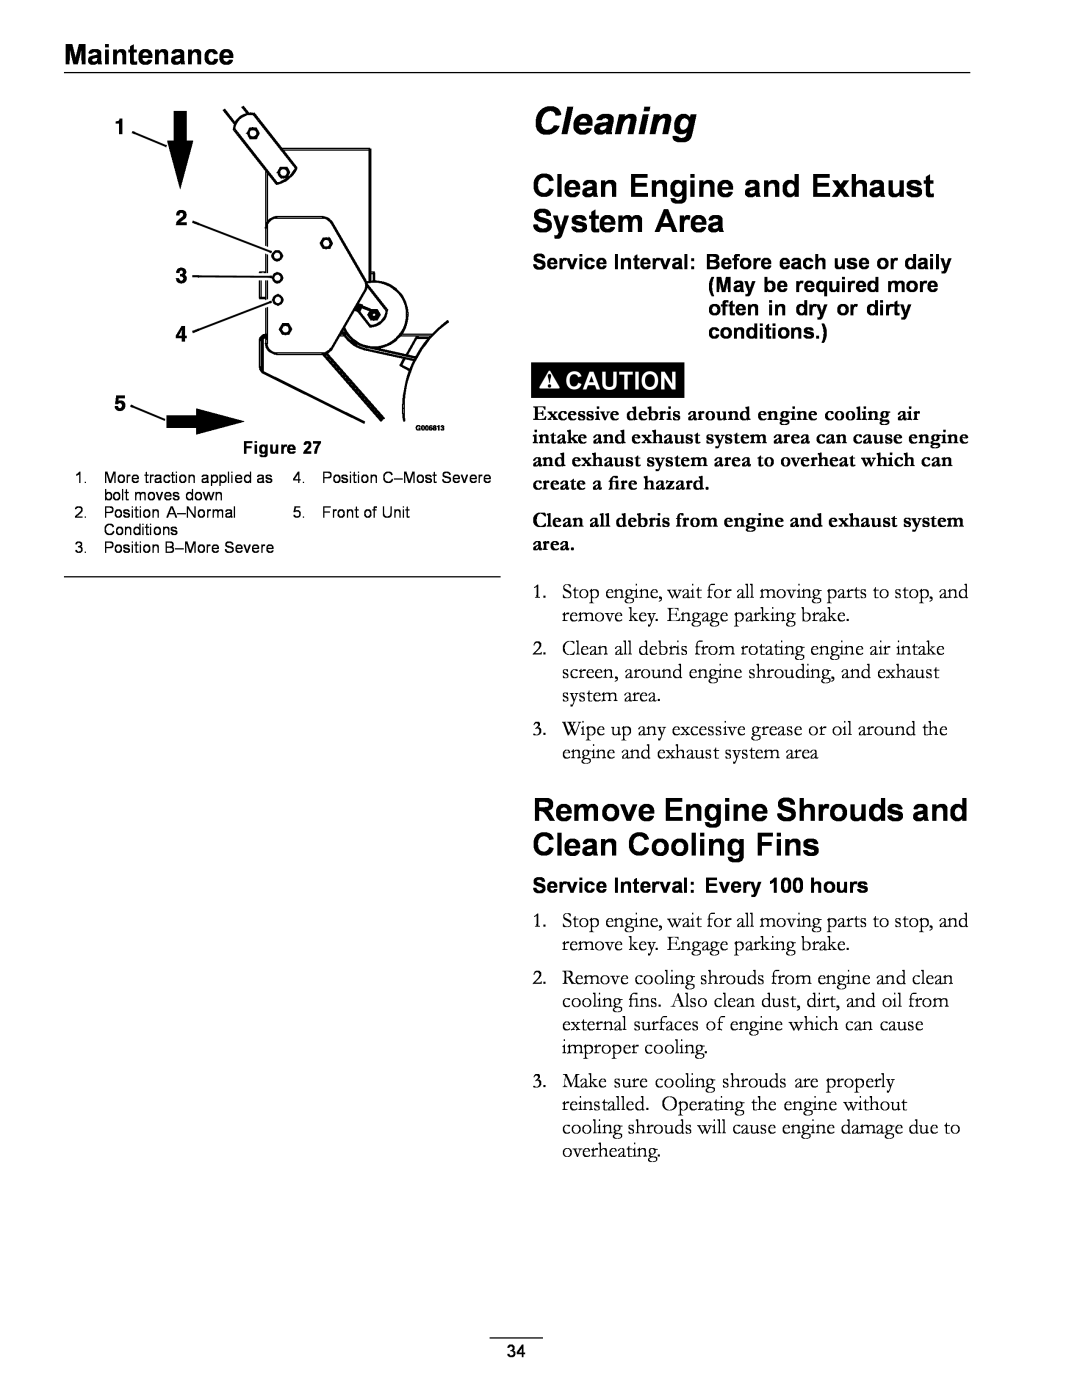 Exmark 4500-689 Cleaning, Clean Engine and Exhaust System Area, Remove Engine Shrouds and Clean Cooling Fins, Maintenance 